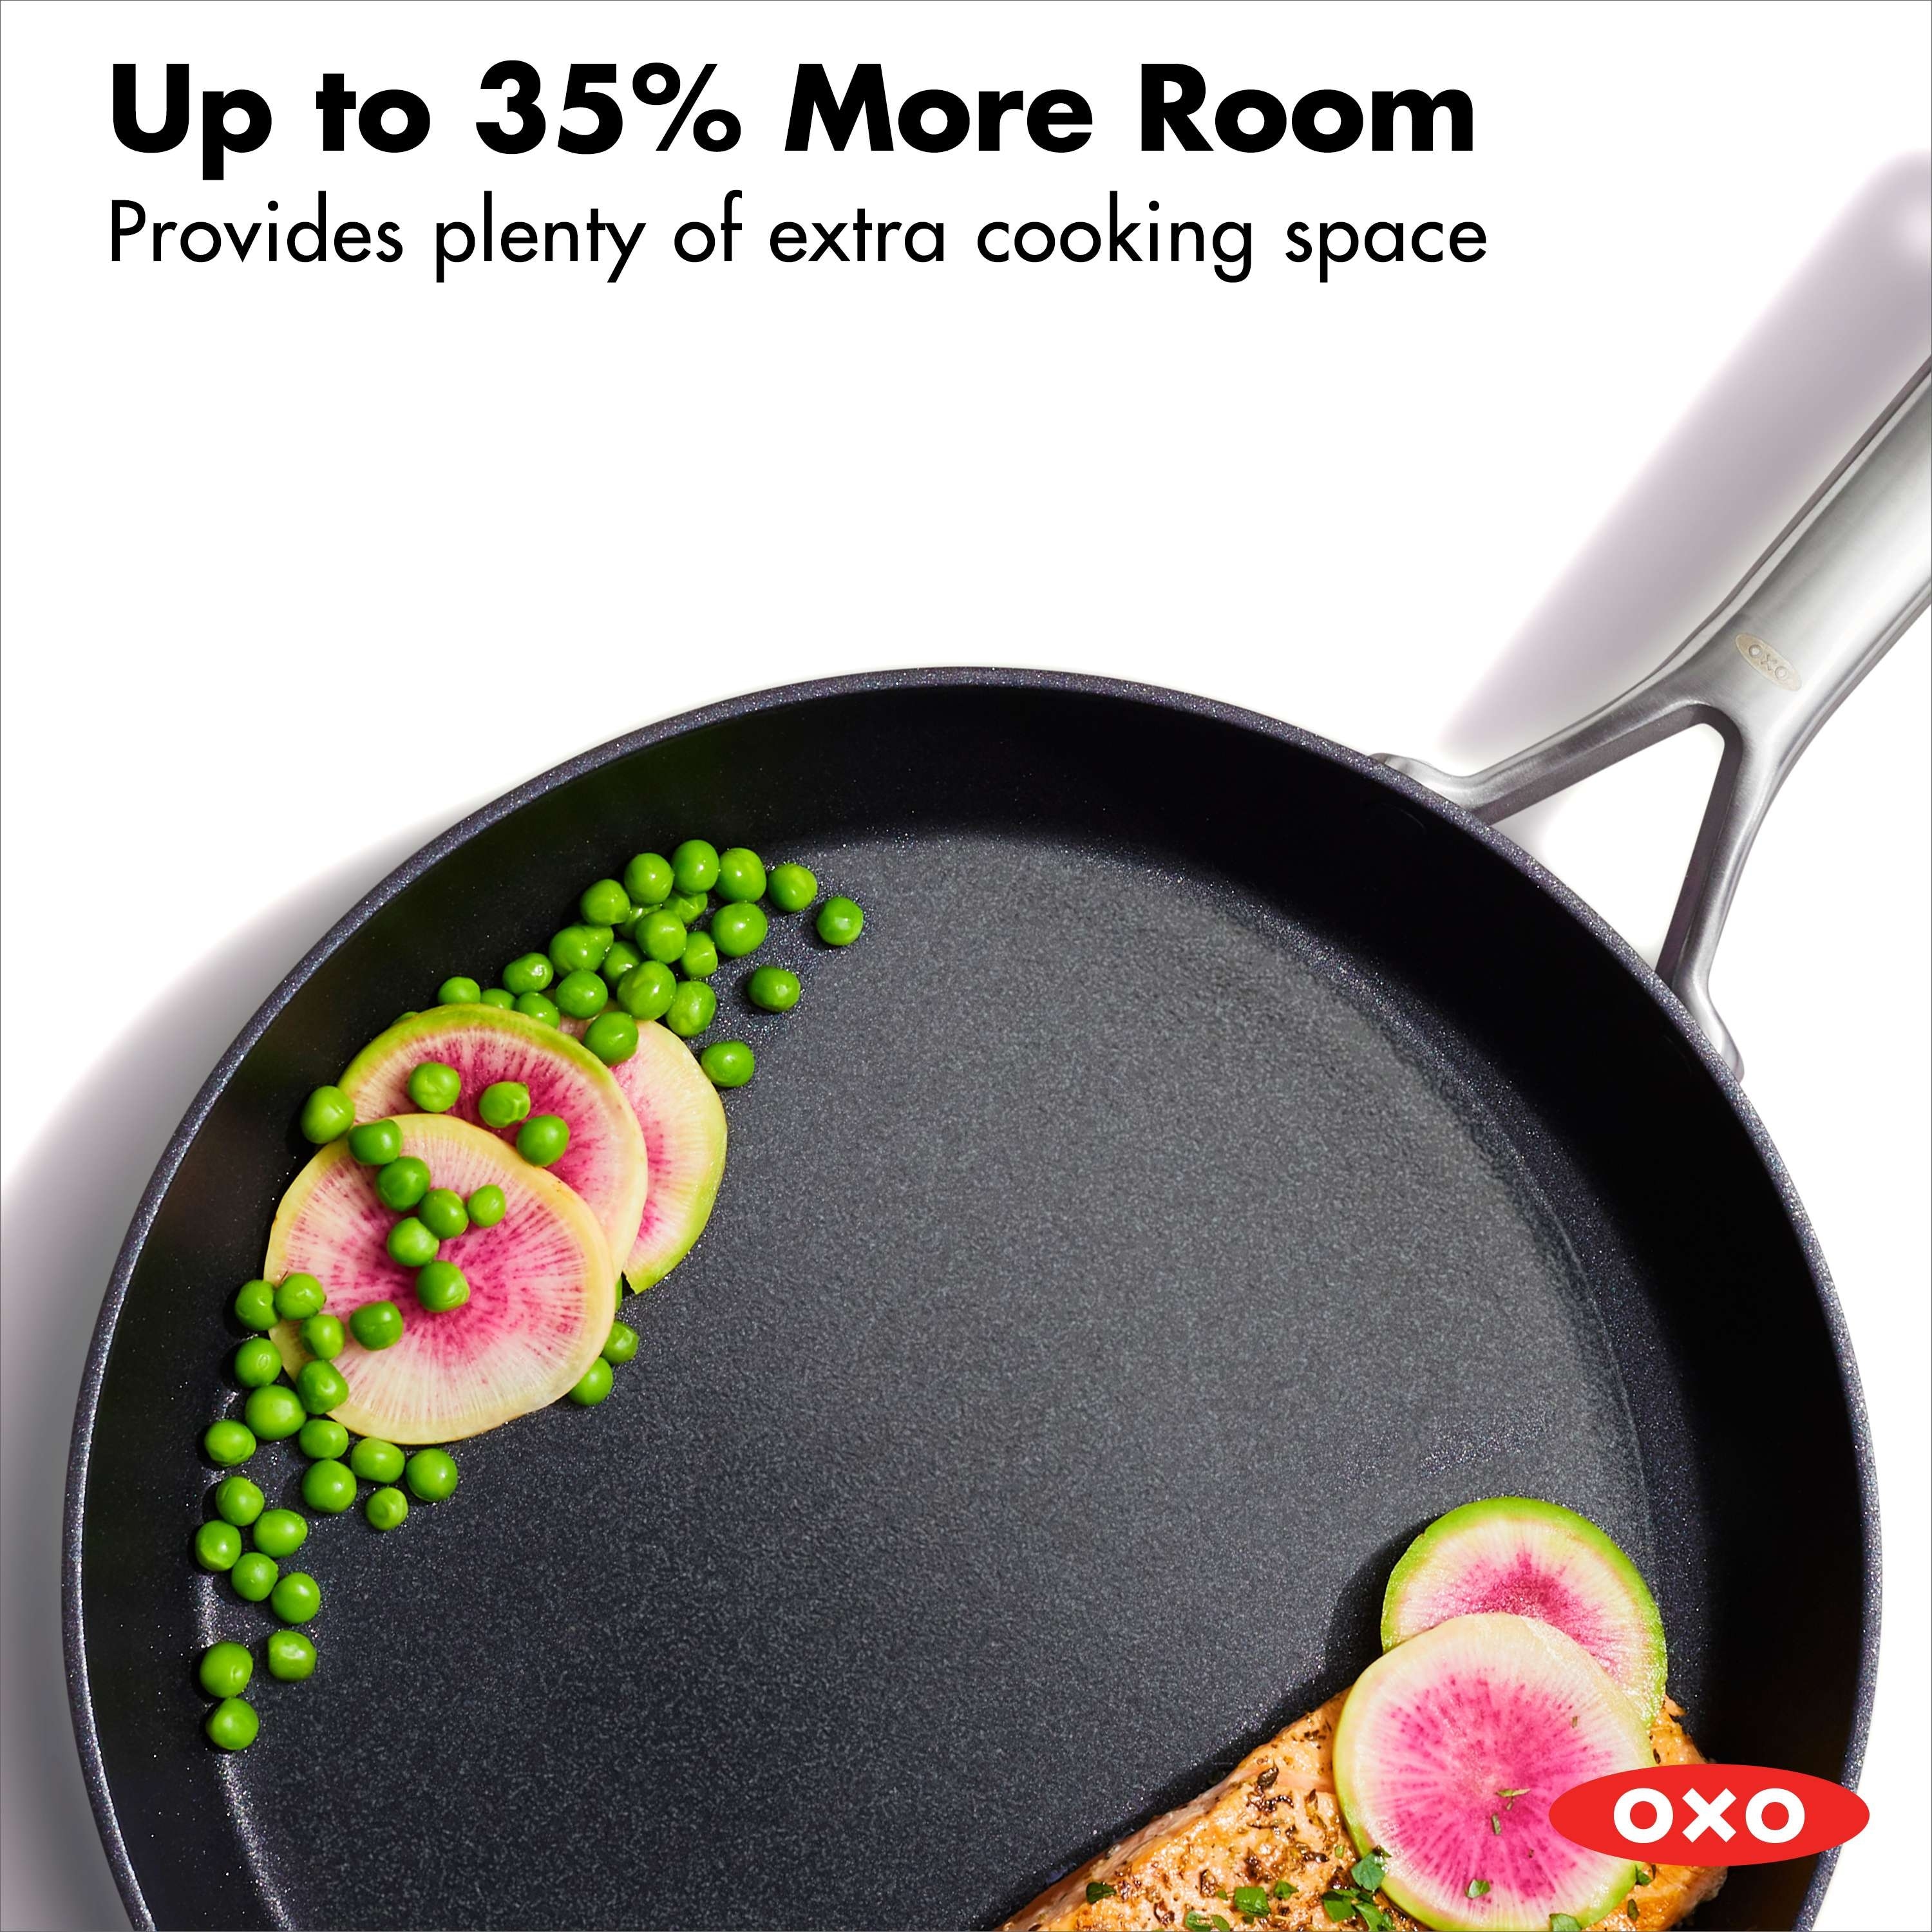 https://ak1.ostkcdn.com/images/products/is/images/direct/f6a252c9495ad832ddd9ab068e5a0227f62b0aad/OXO-Professional-Ceramic-Non-Stick-10-Piece-Cookware-Pots-and-Pans-Set.jpg